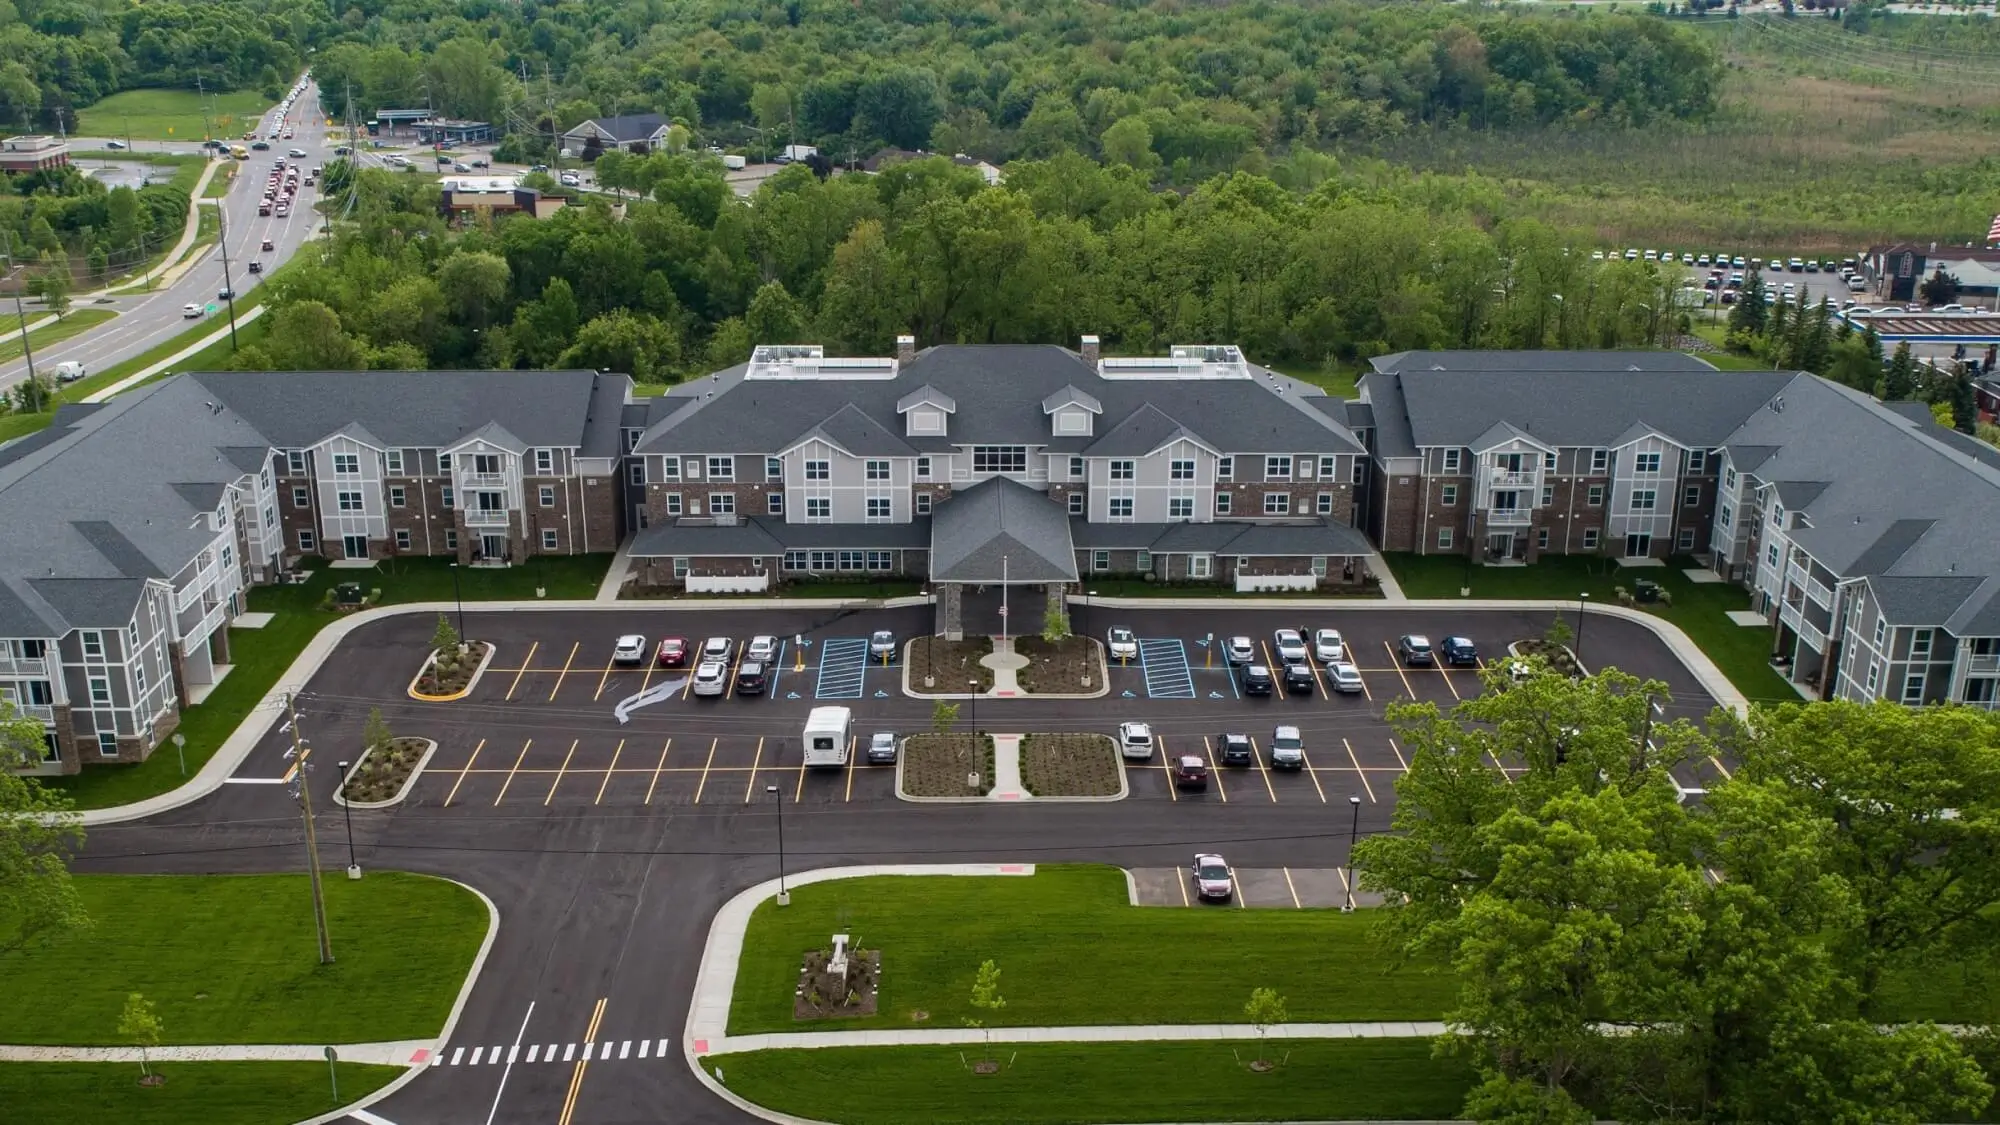 Aerial view of Rolling Hills Retirement Community